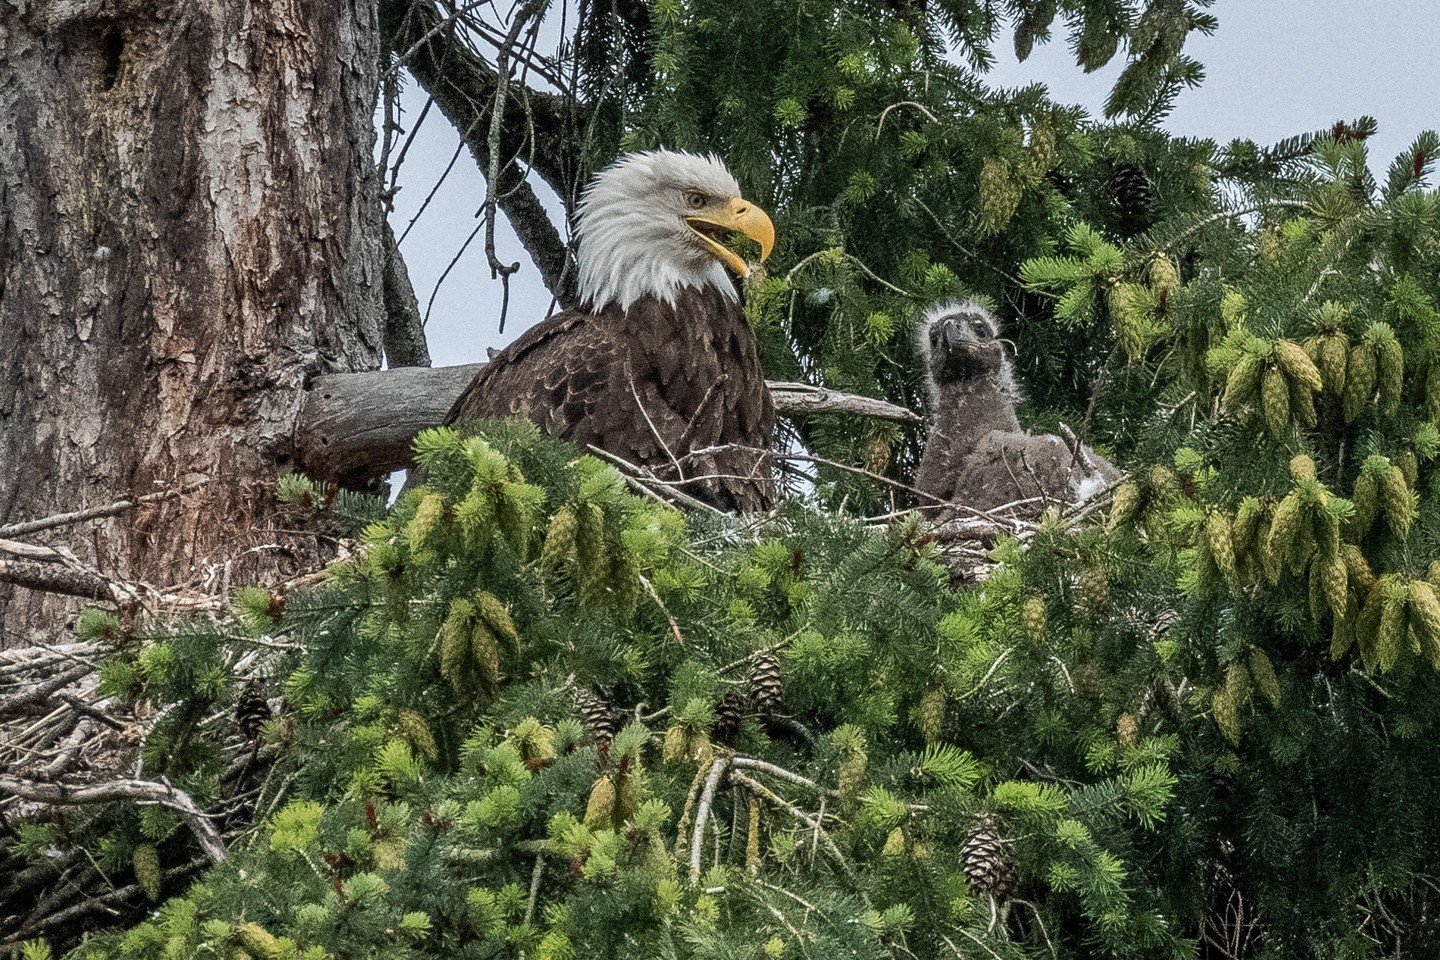 🚨 Bald Eagle Update! 🚨

We've seen the Eaglet! 

Did you know that the timetable for Bald Eagle activity around Nanaimo is very predictable? 

We tend to have Bald Eagles mating around Valentine's Day, finish prepping their nests by mid-March, and 